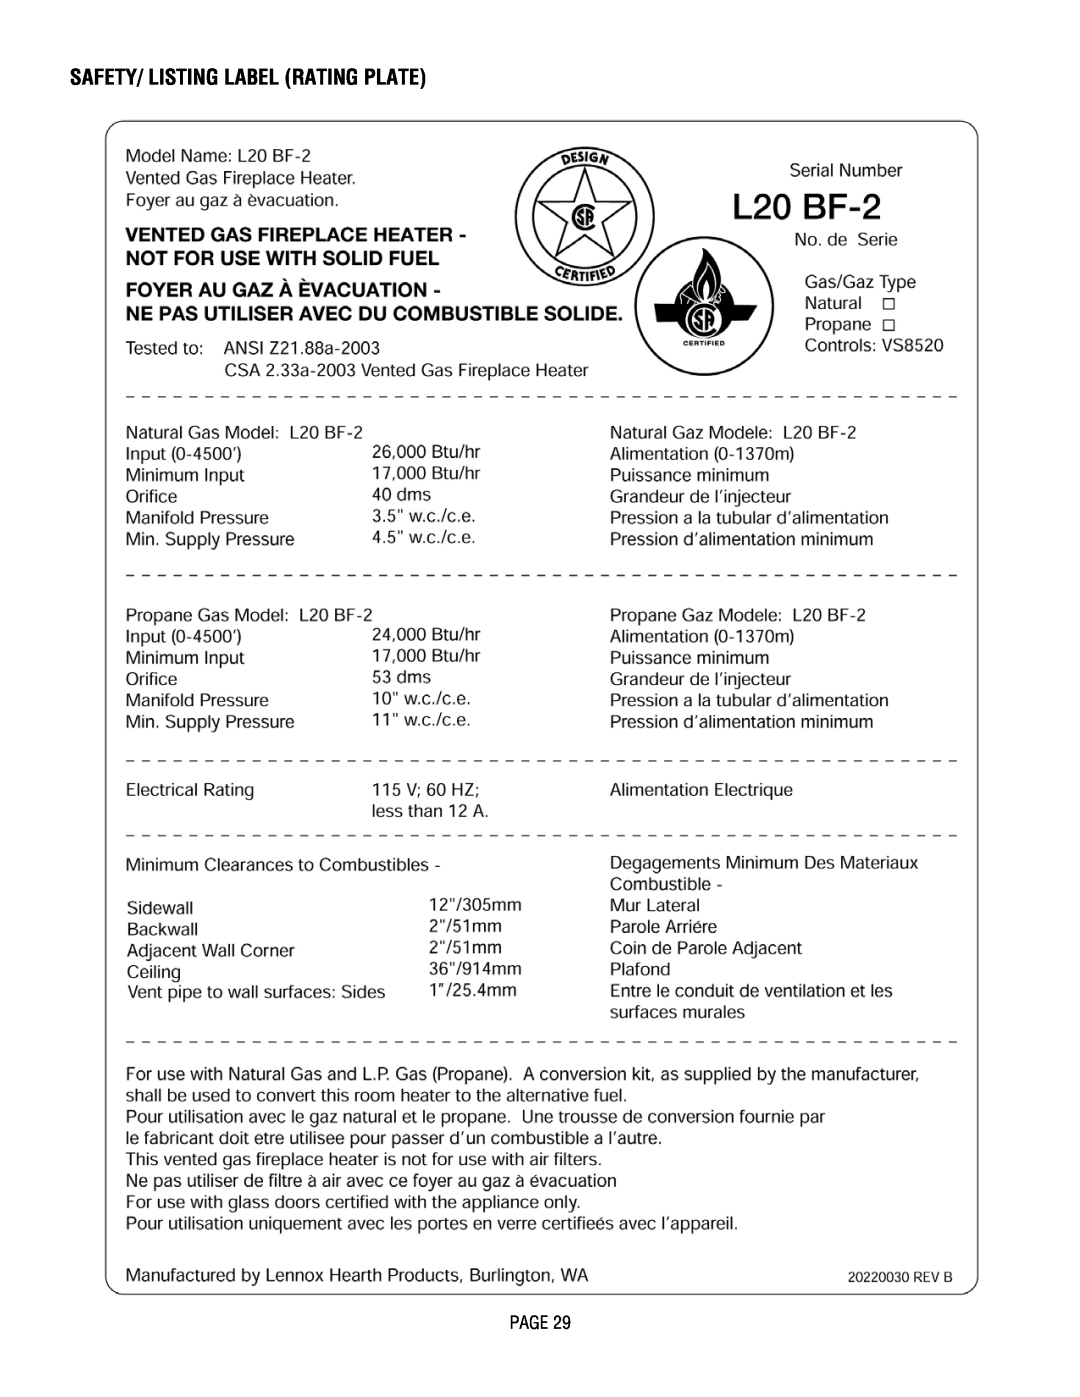 Lennox Hearth L20 BF-2, L20 DVF-2 manual Safety/ Listing Label Rating Plate, Page 